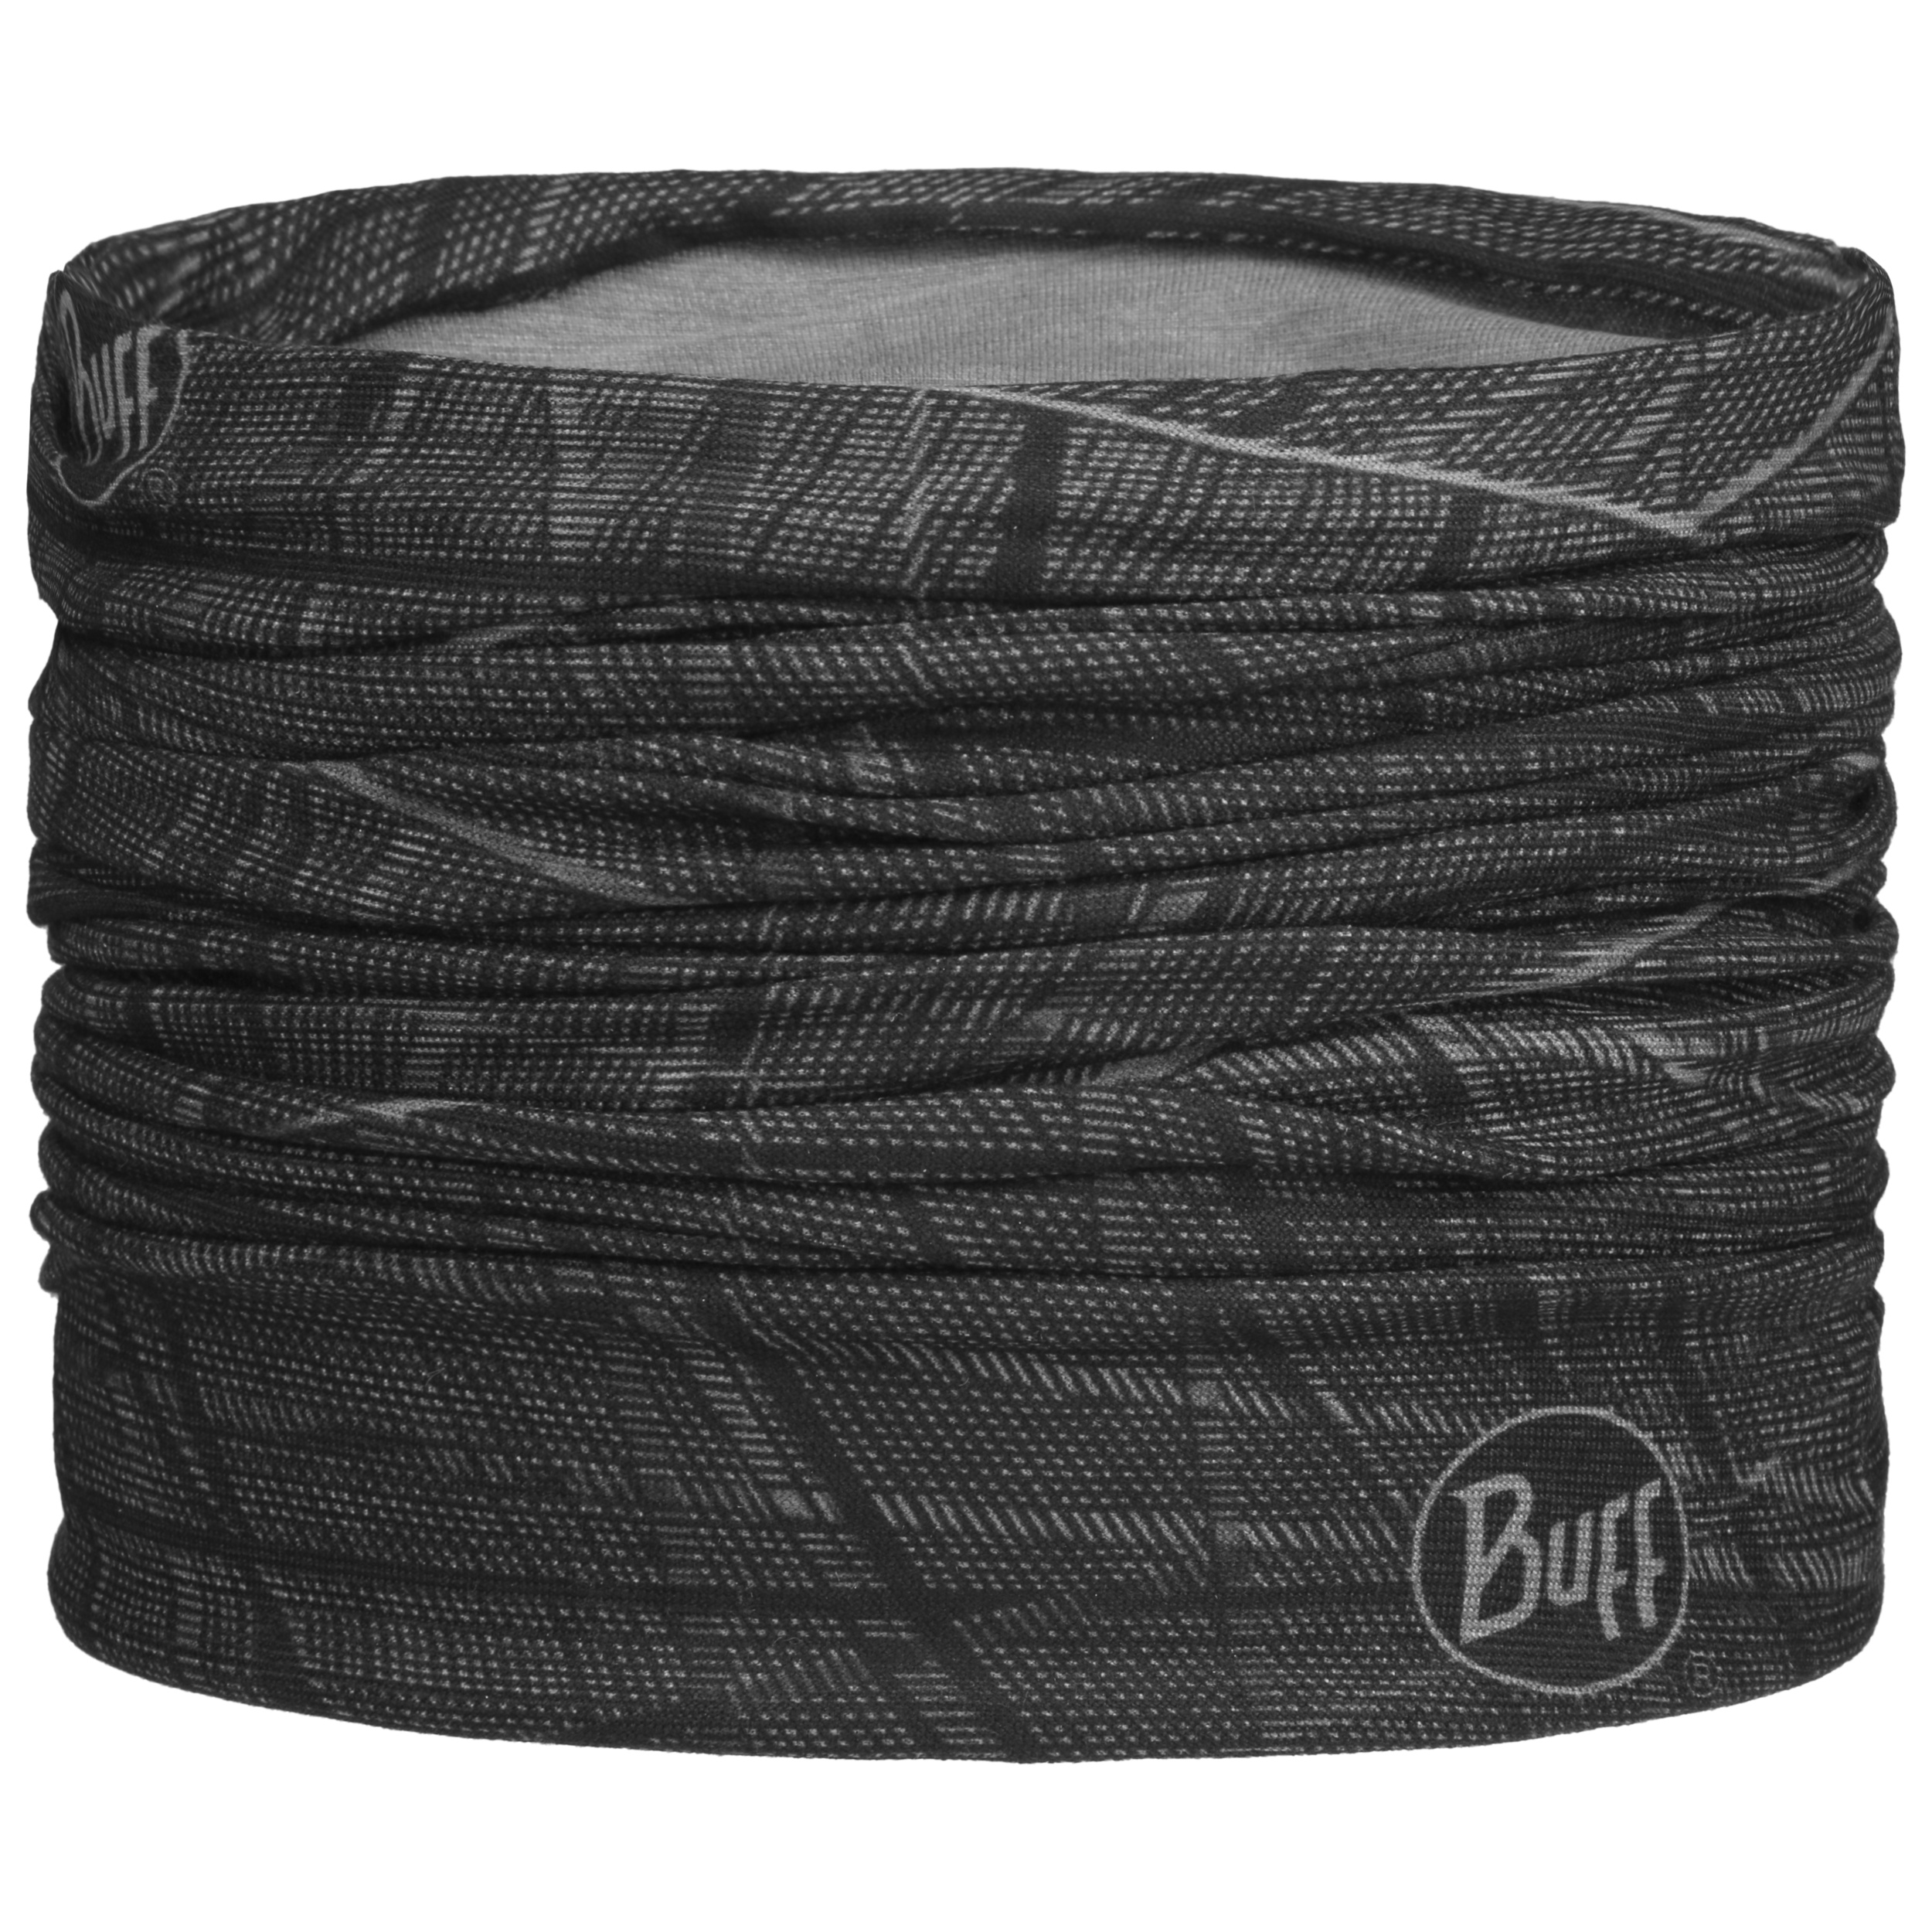 by € Black Embers BUFF 14,95 - Multifunktionstuch